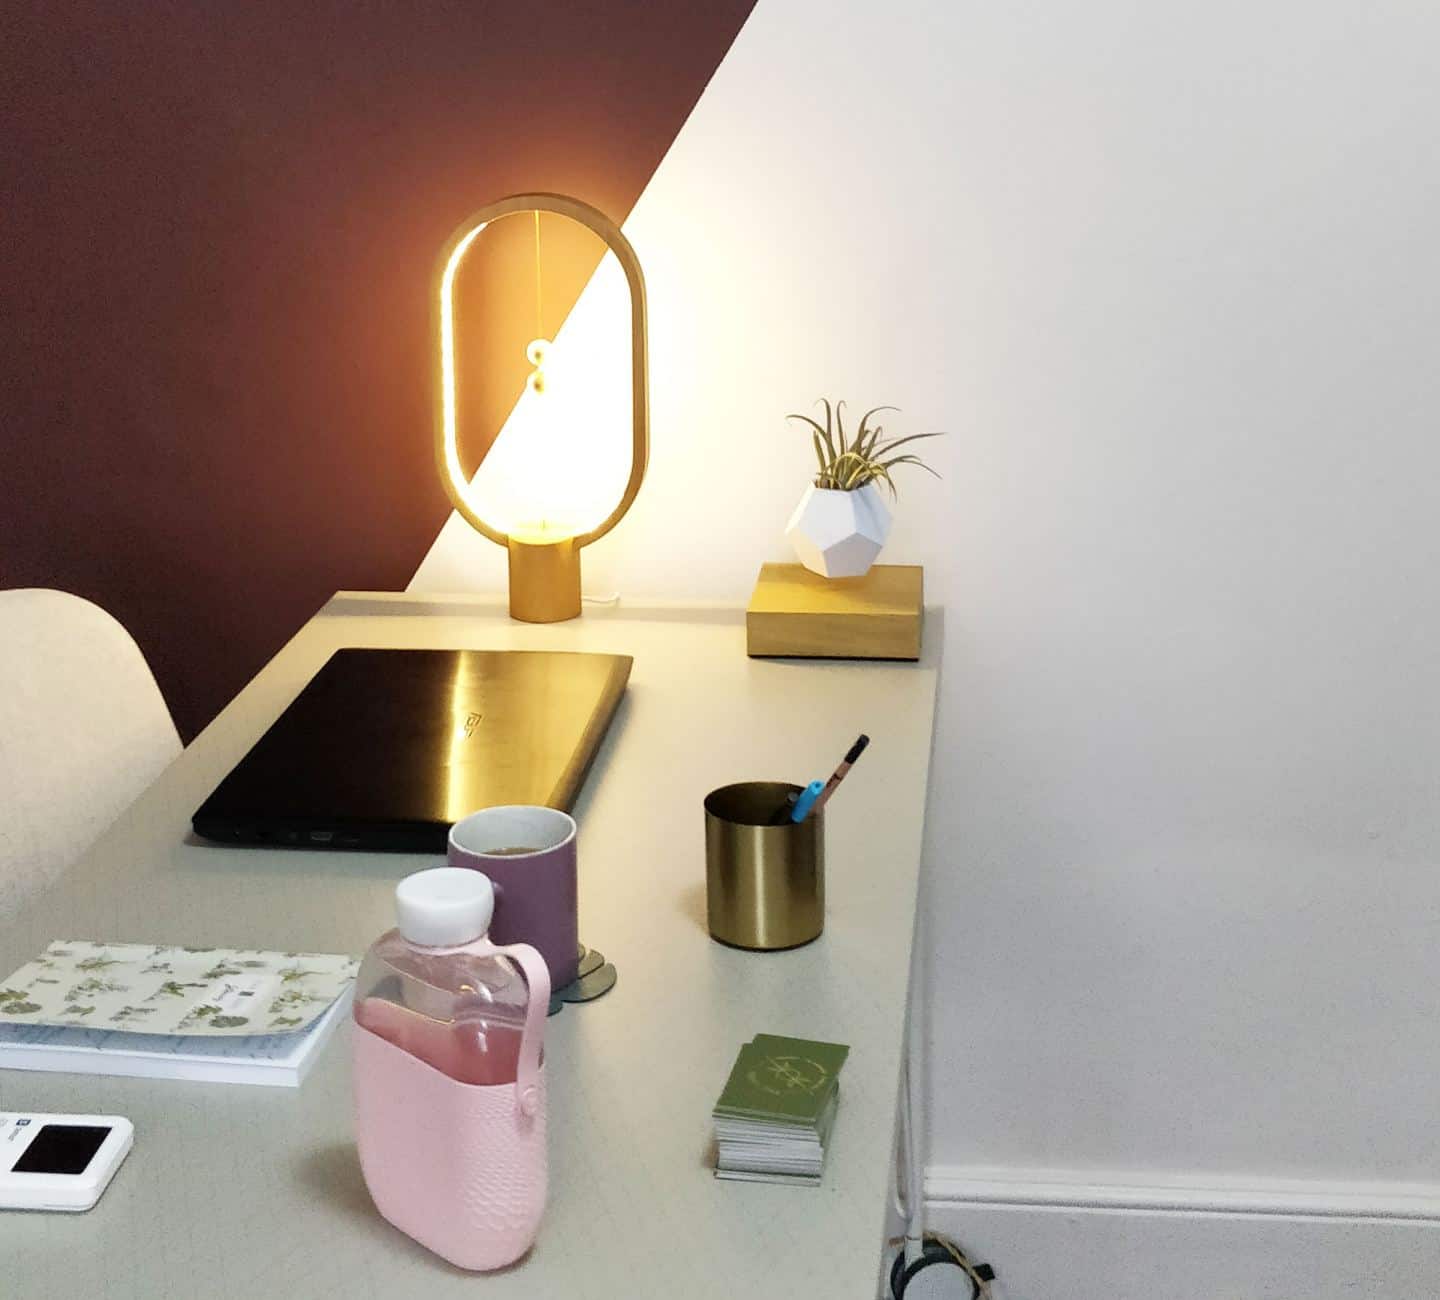 Heng Balance Lamp by Enso & Paris on a desk in an office